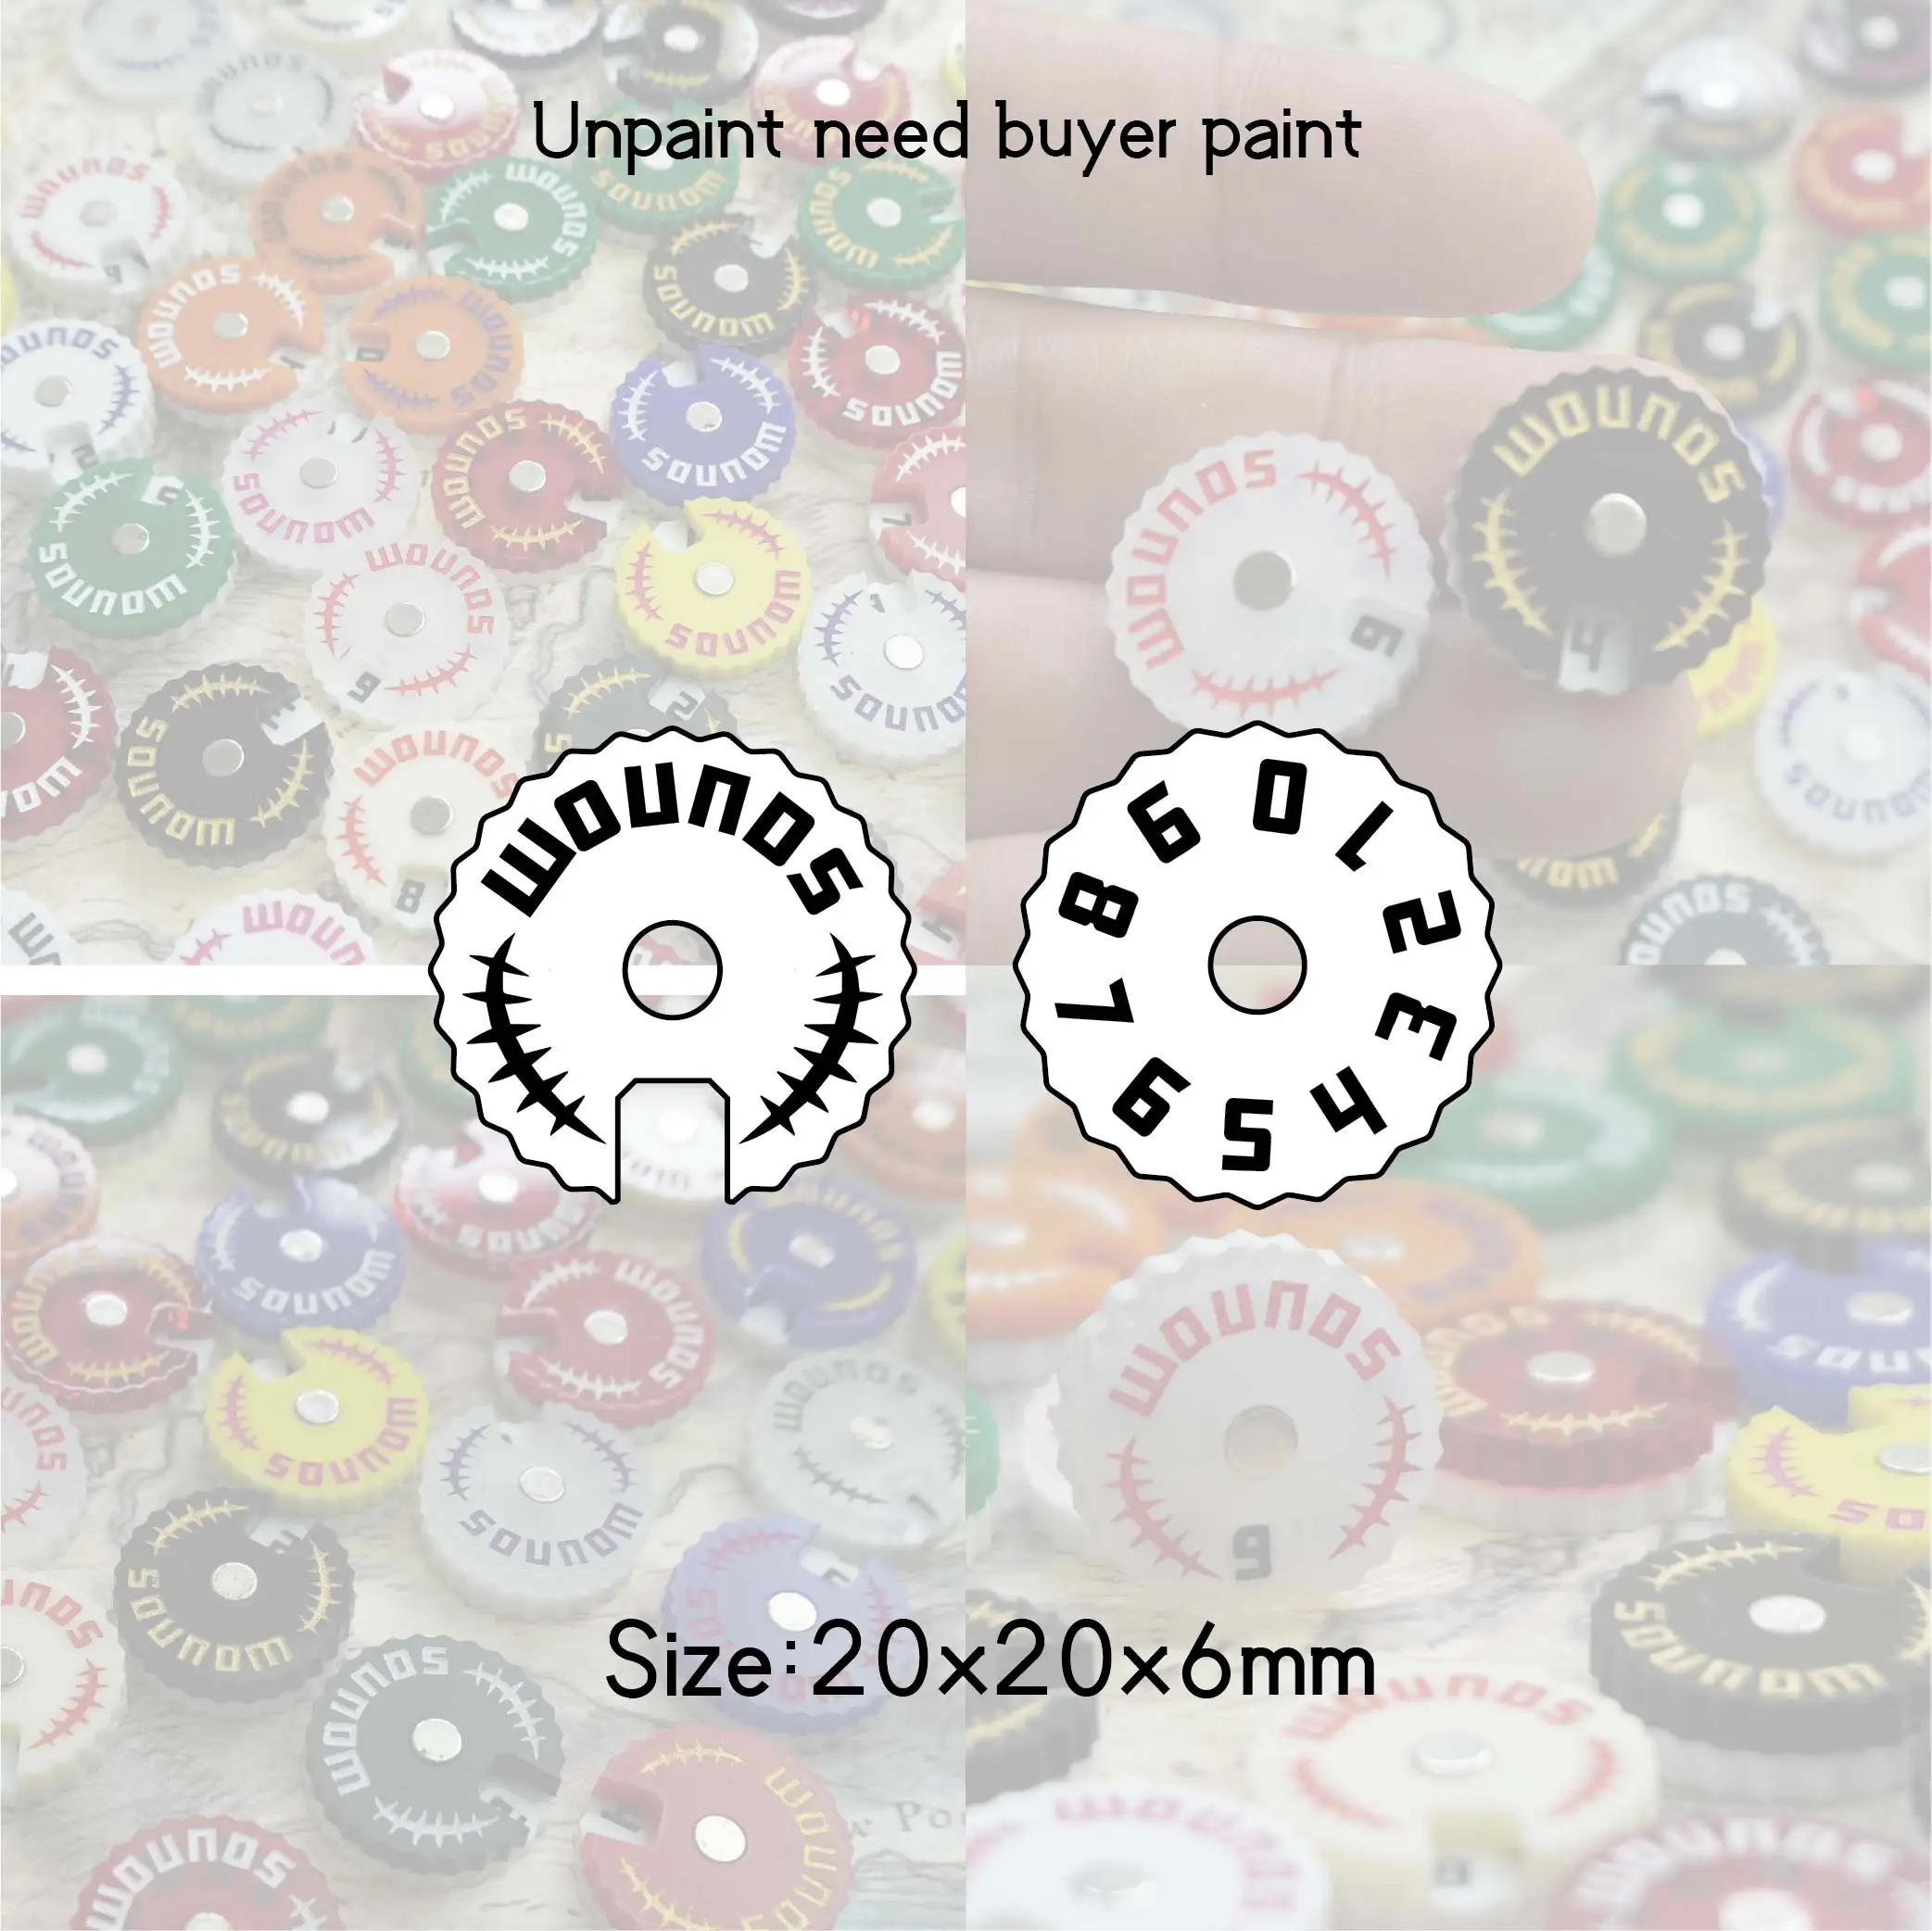 20mm version - Wound Tracker Counter /Dial/Marker 0-9 Wound Counter - 10 sets- need buyer paint